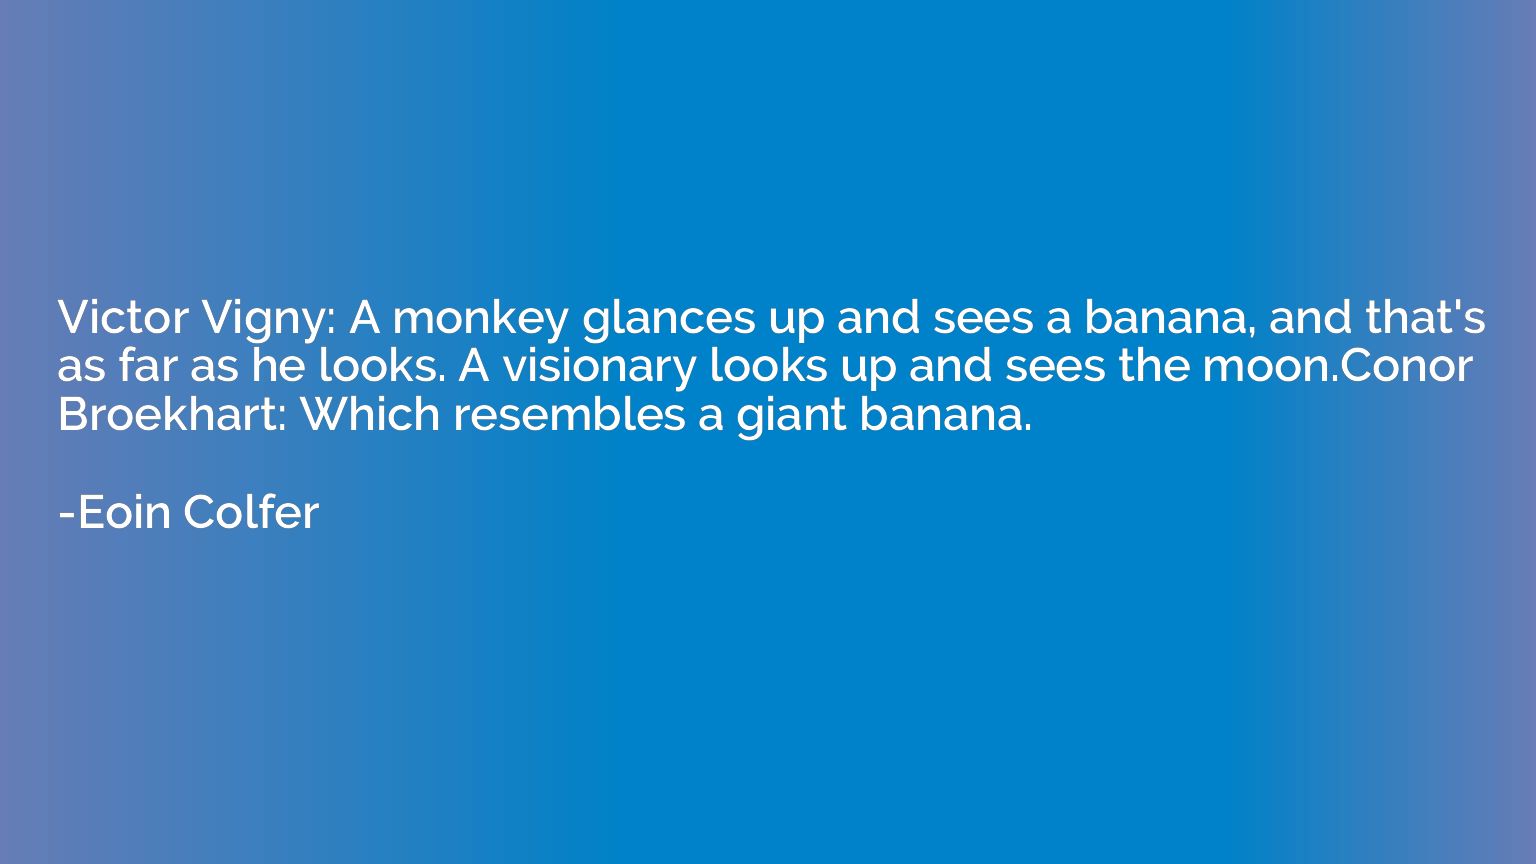 Victor Vigny: A monkey glances up and sees a banana, and tha